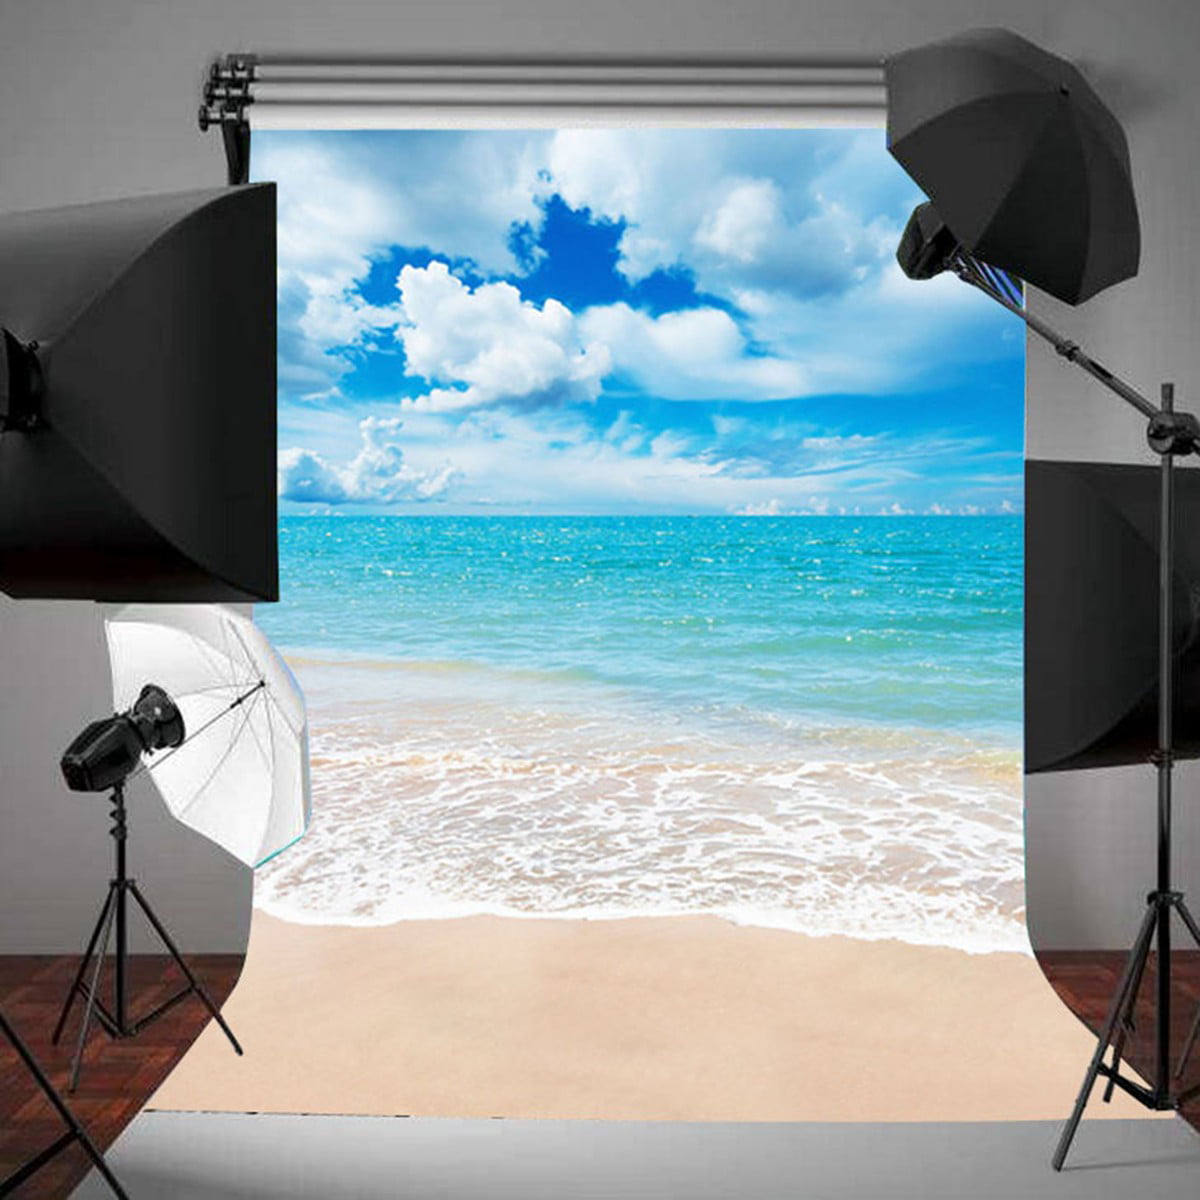 Sea Beach Shell Backdrops Photographic Scenery Photography Background Party Photo Video Studio Props Blue Photographic Backdrop Photo Studio Background Photographic Indoor Backdrops Photo Studio